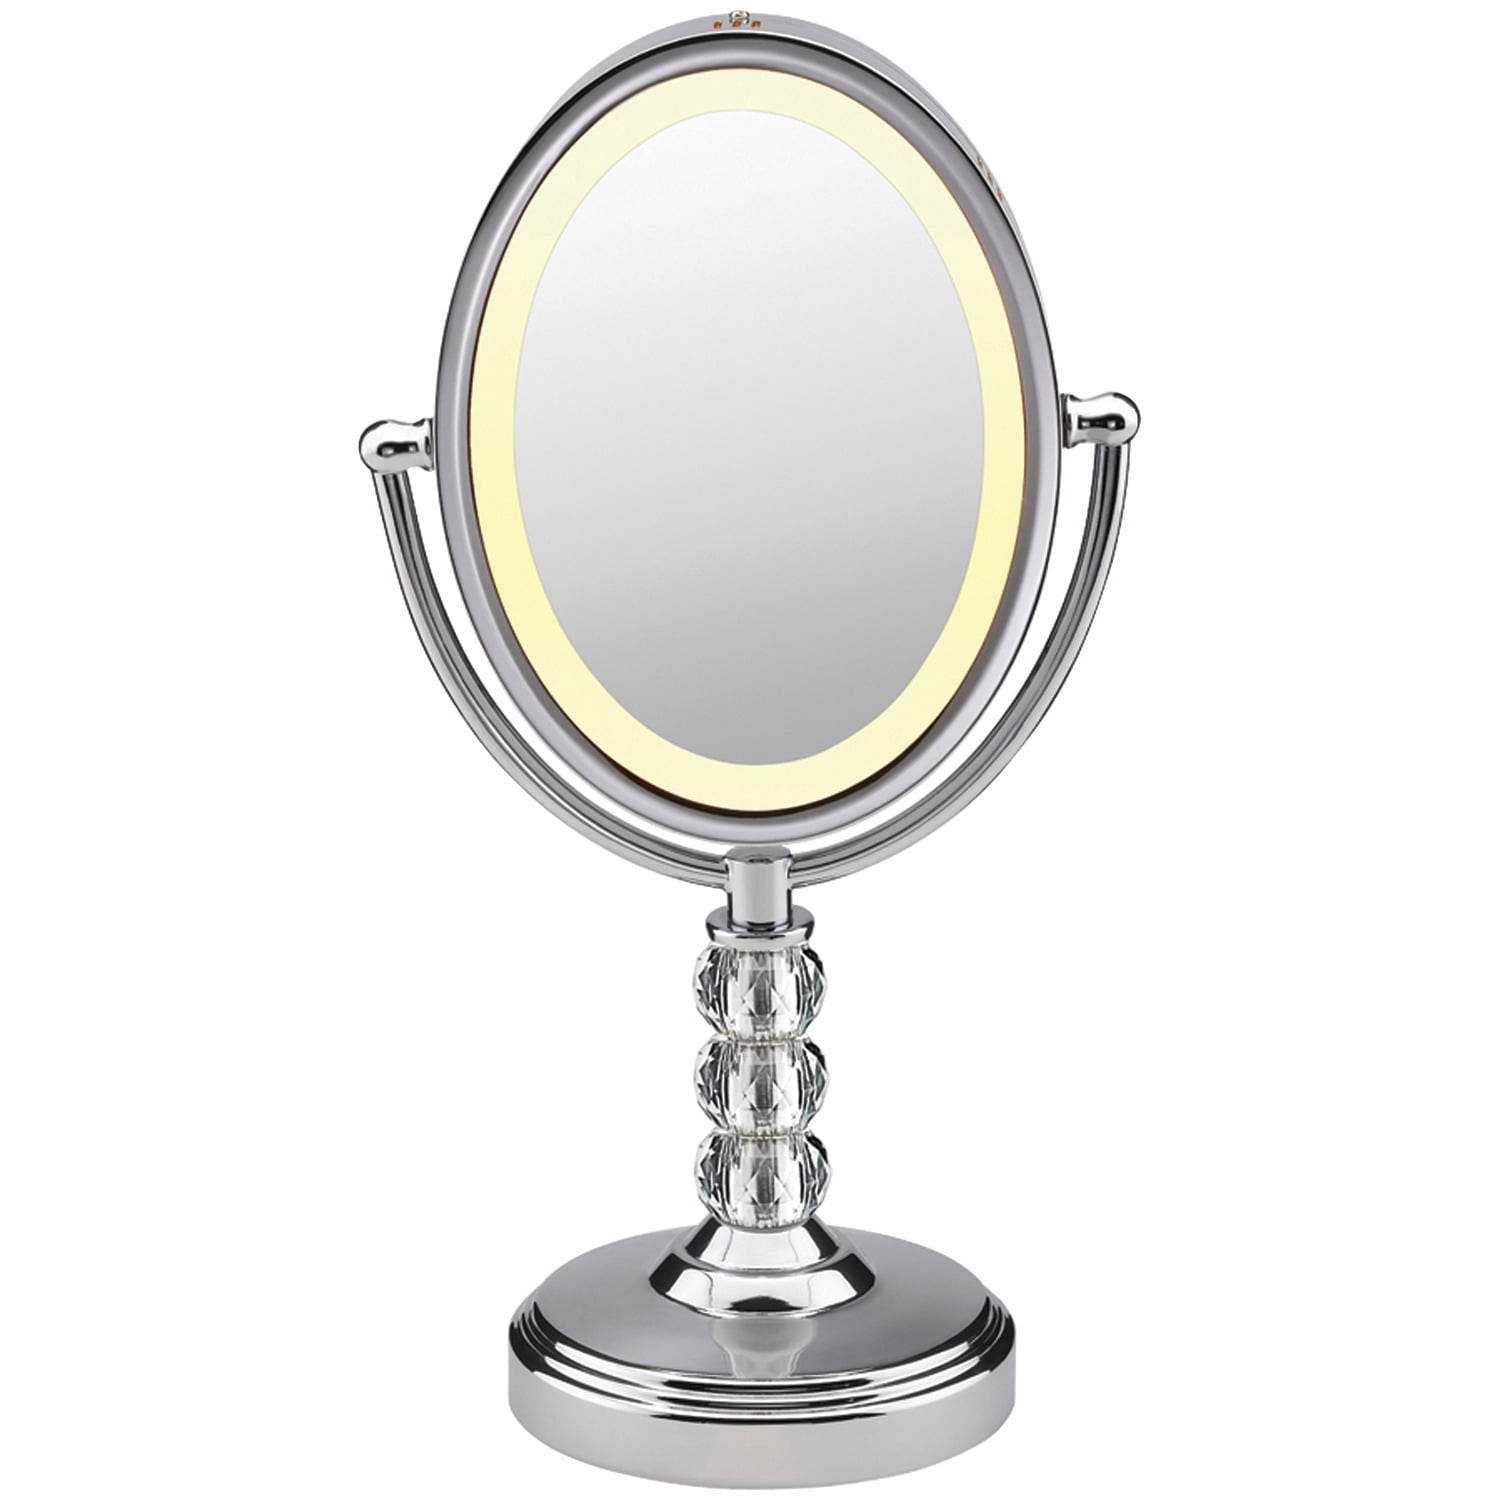 Conair Be71ct 7x Oval Crystal Ball, Oval Makeup Mirror With Lights